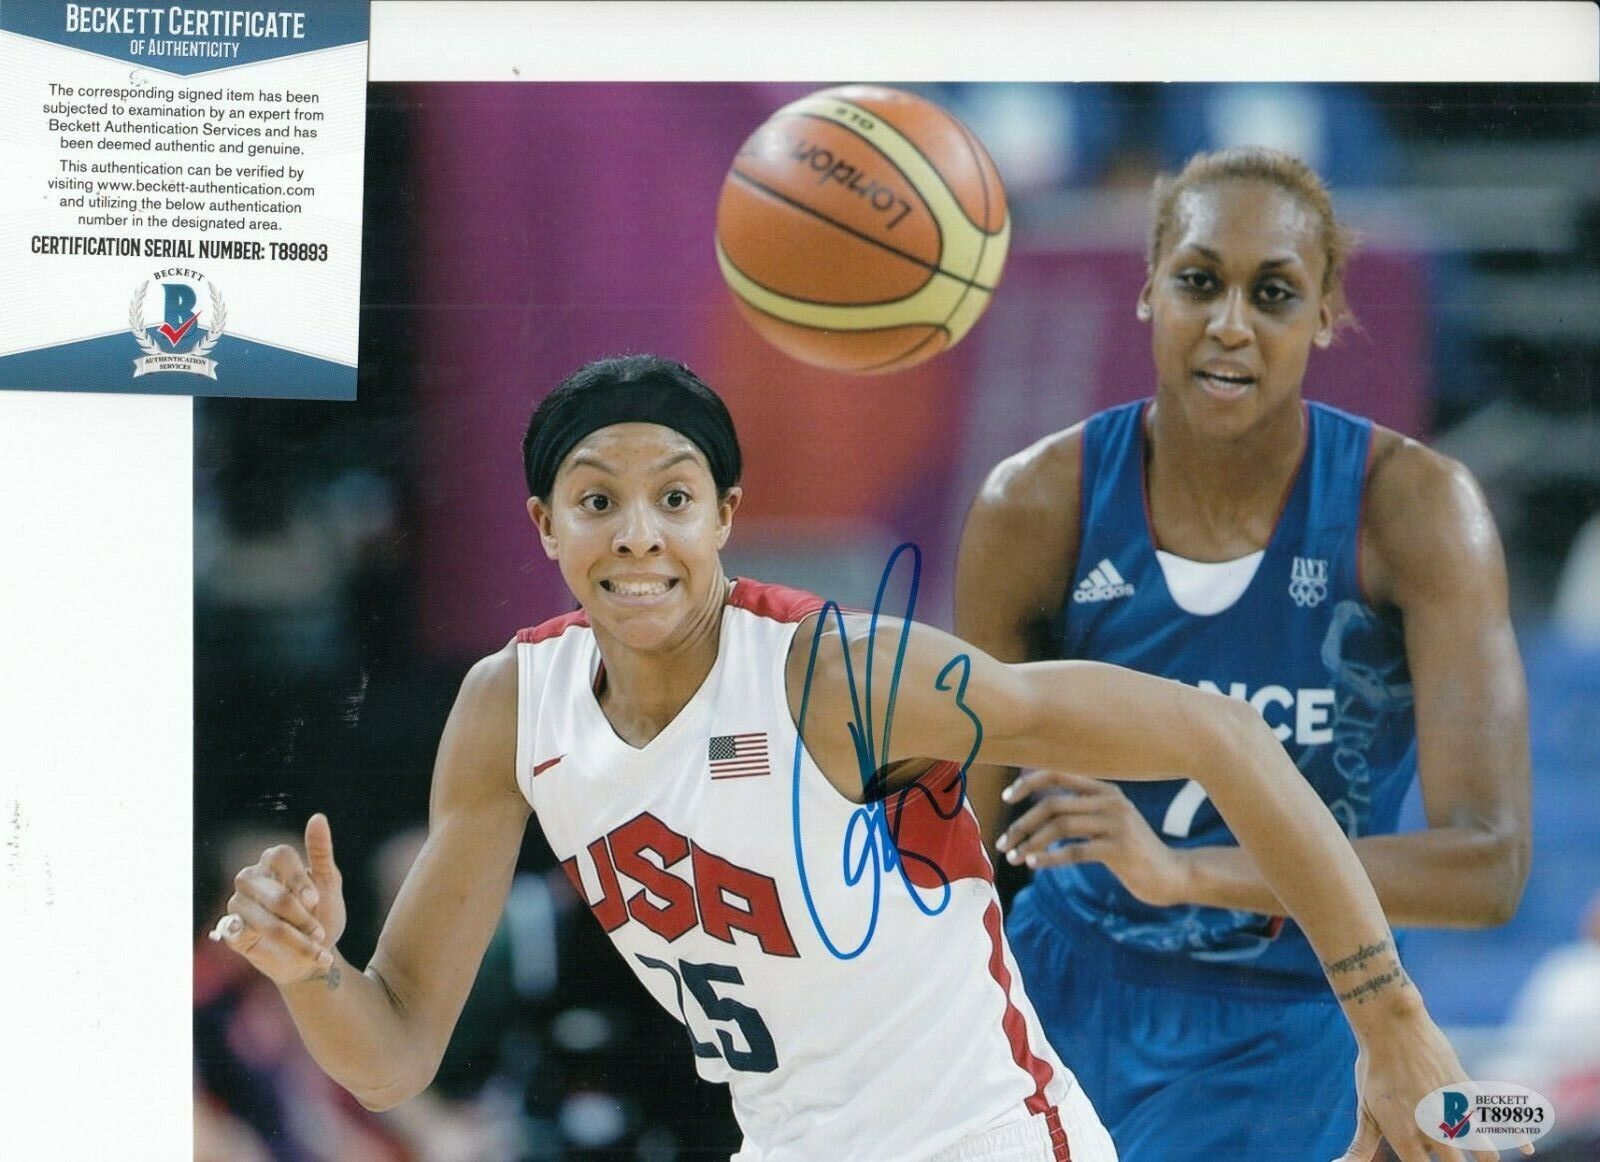 CANDACE PARKER signed (LOS ANGELES SPARKS) WNBA 8X10 Photo Poster painting BECKETT BAS T89893